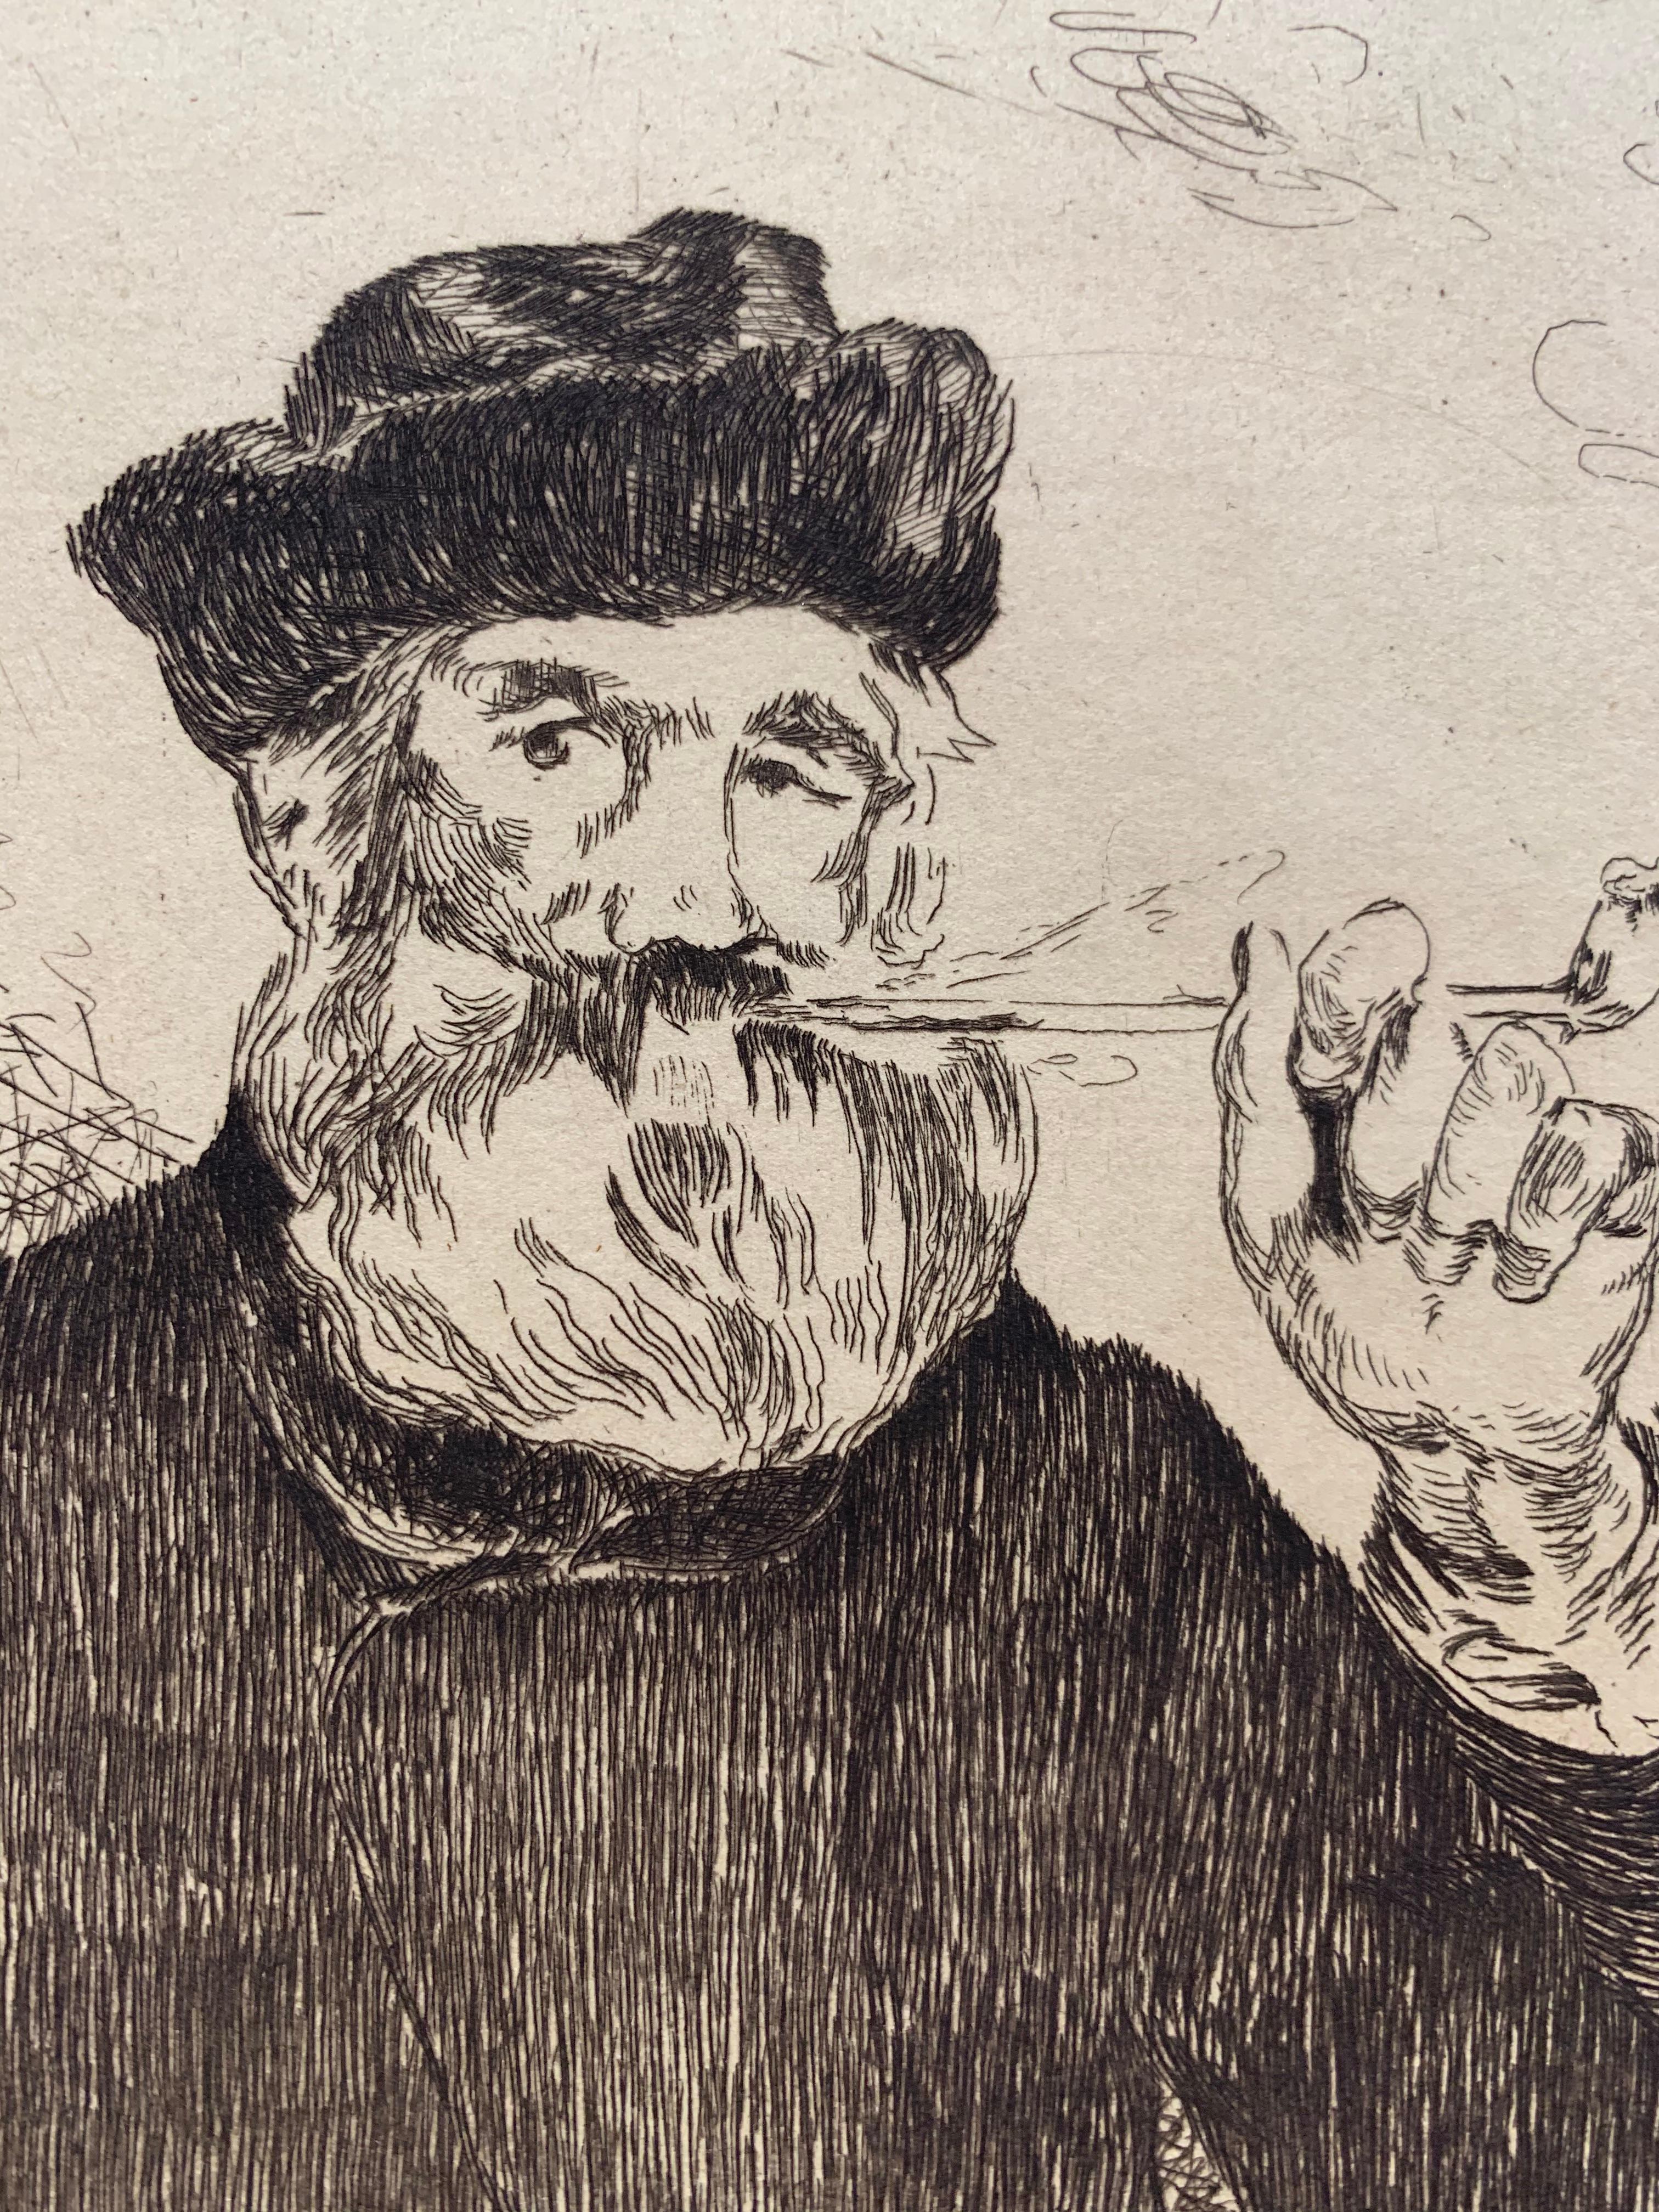 Le Fumeur (The Smoker, French Impressionist male portrait) - Print by Edouard Manet